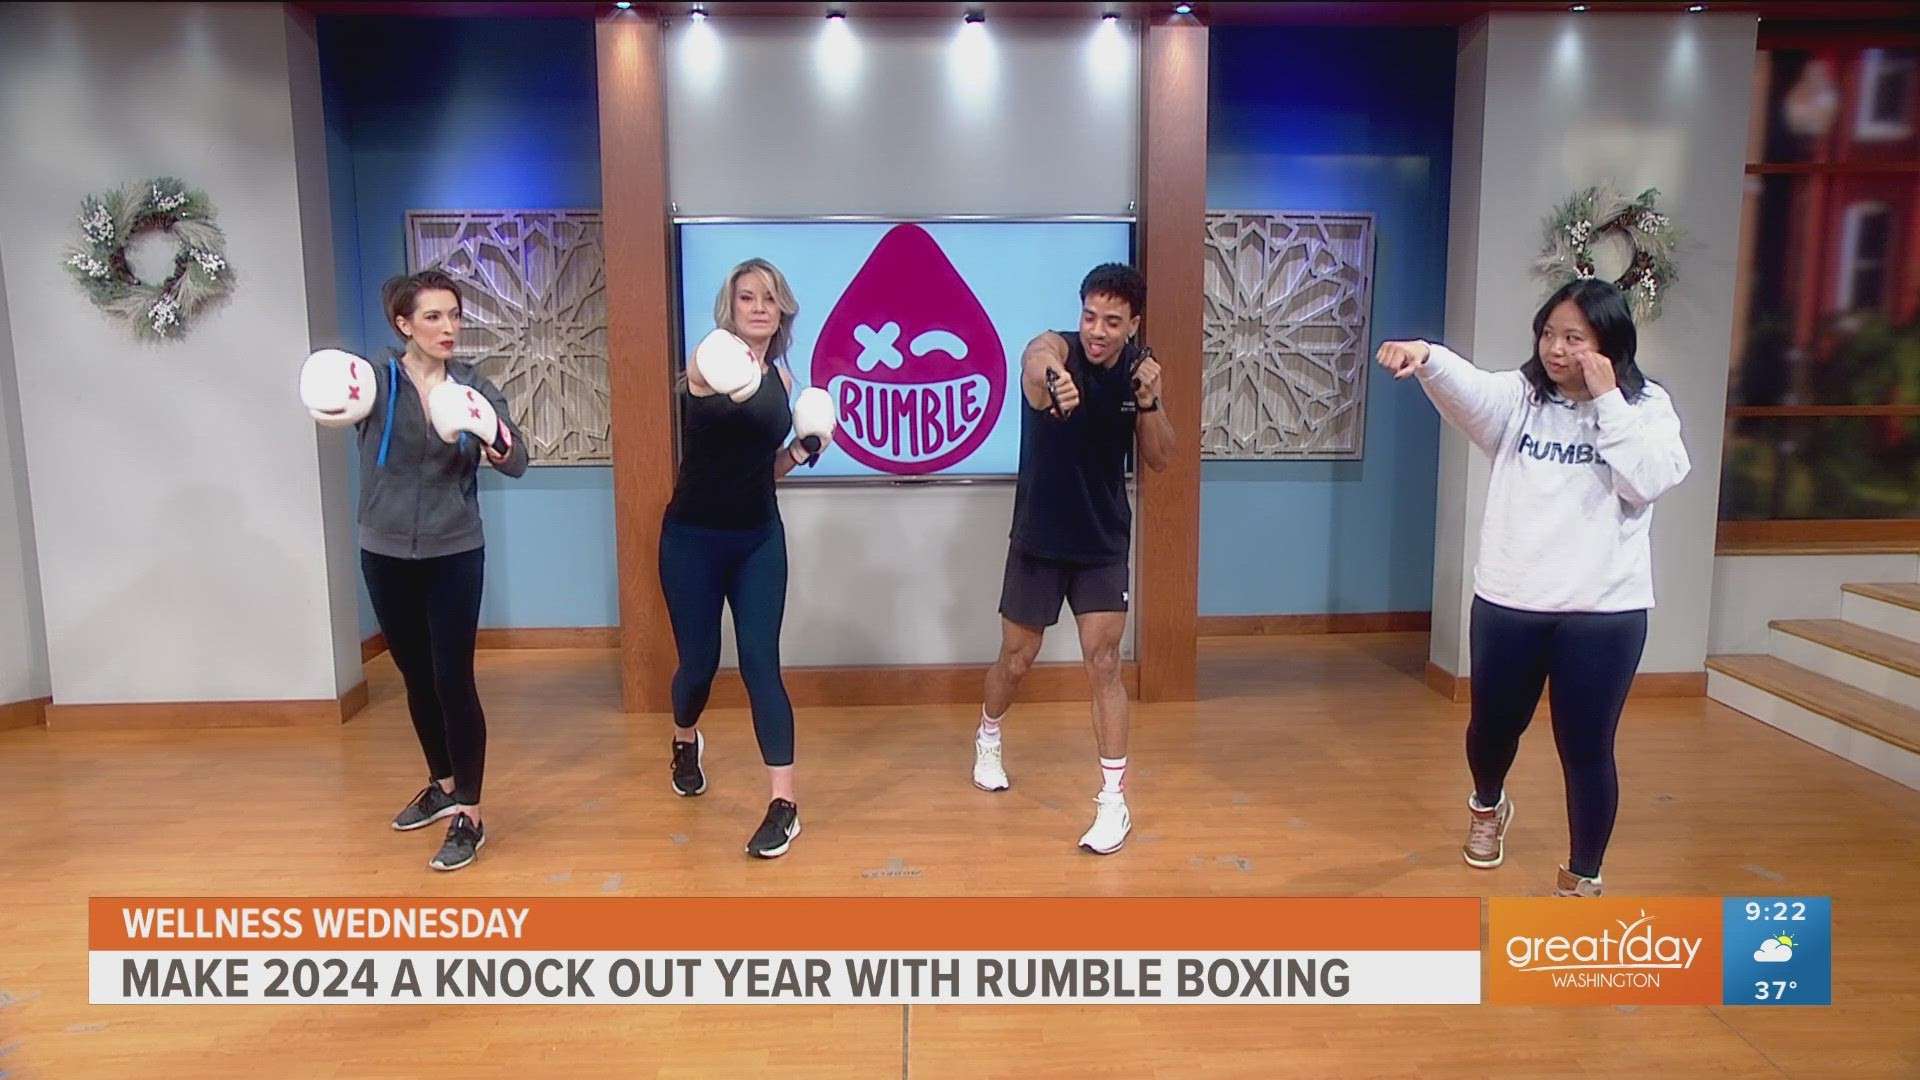 Mix-up your workout routine in 2024 with a hard-hitting, inclusive and upbeat workout from Rumble Boxing